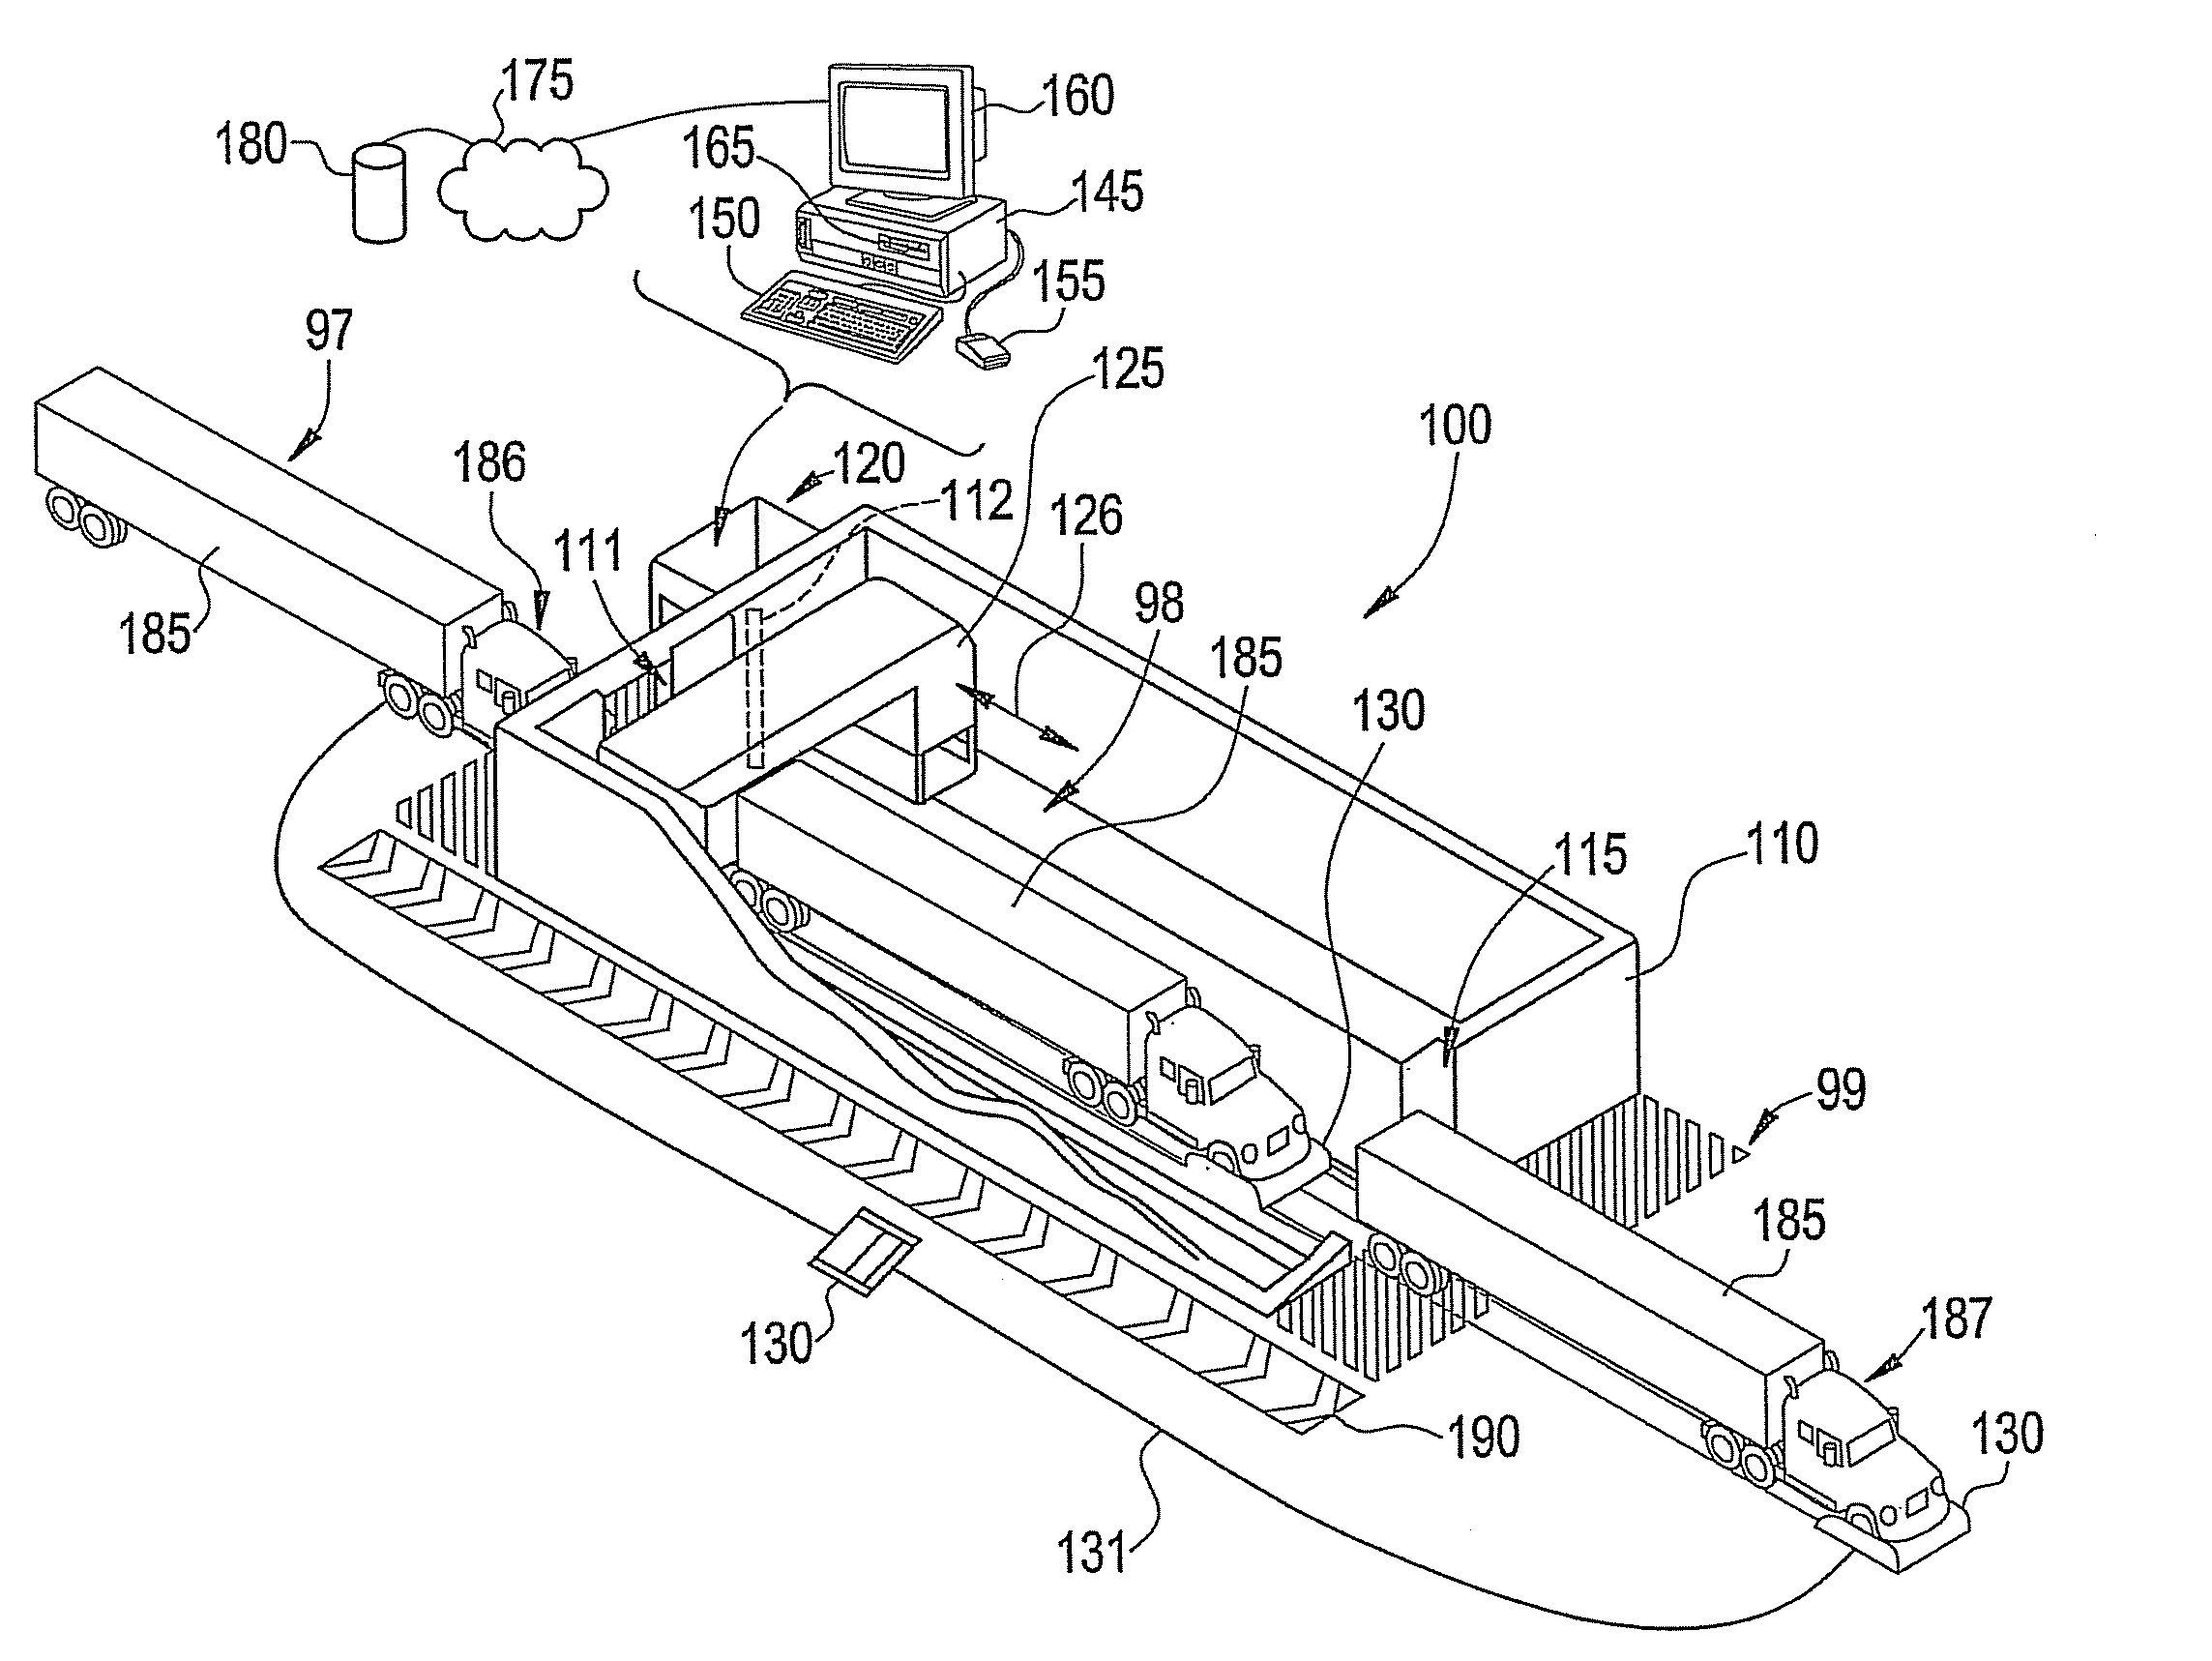 Inspection system and method